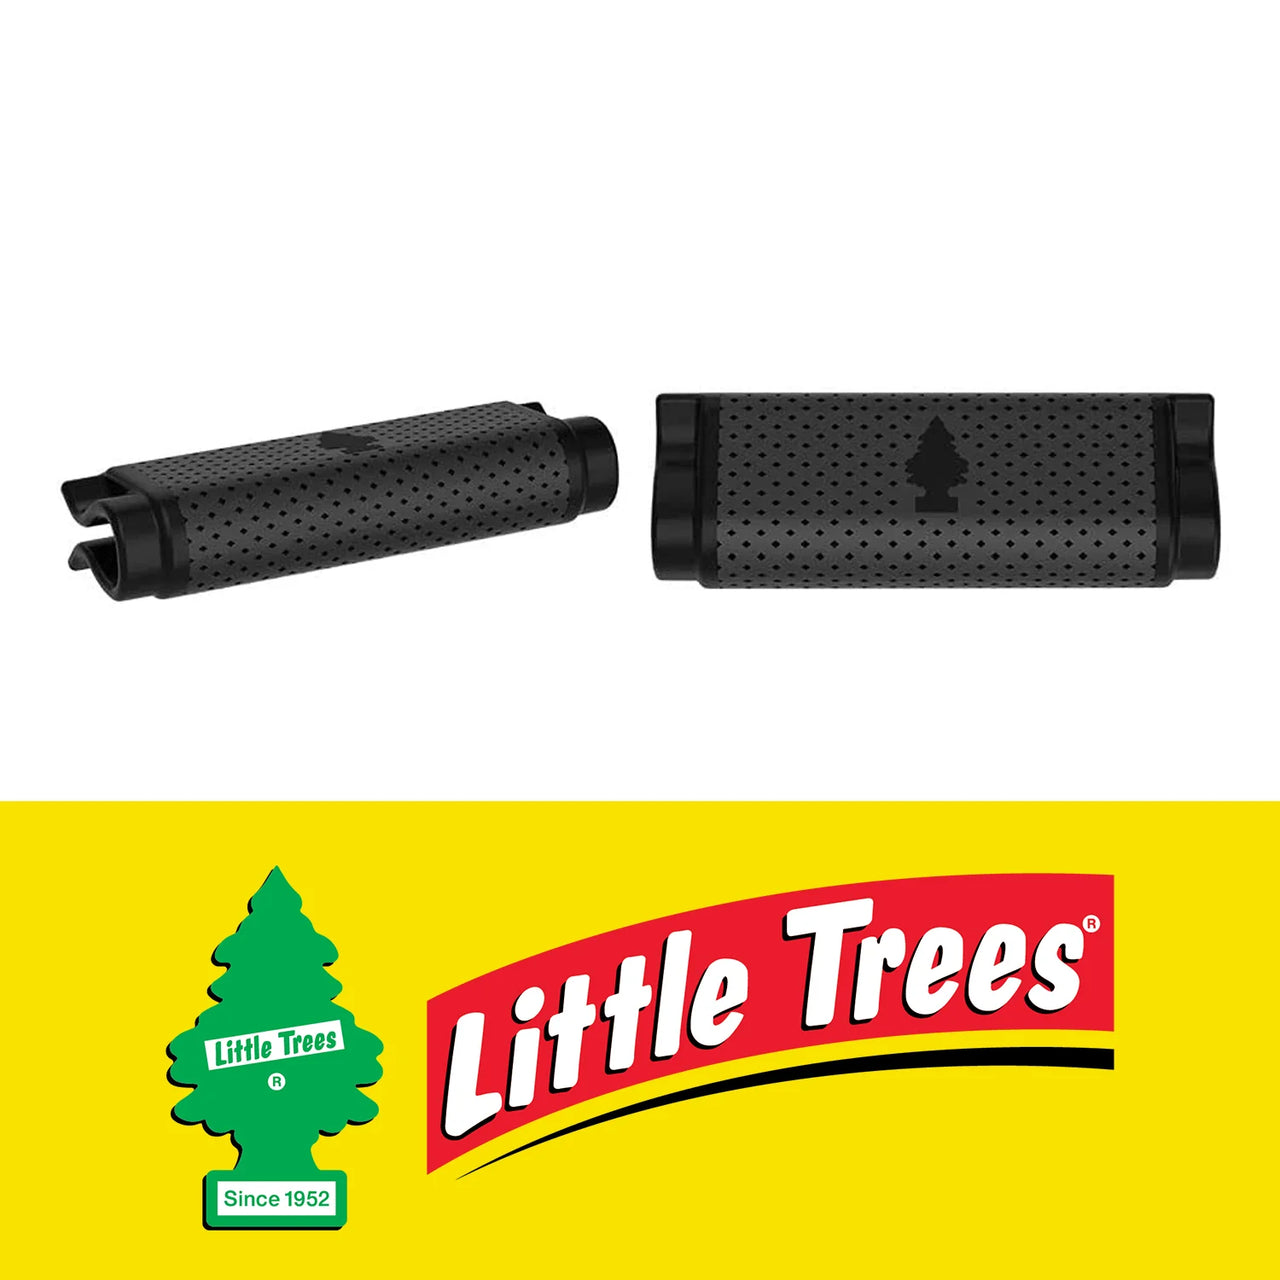 LITTLE TREES-Vent Wrap-Vanilla Aroma- 4 pcs in 1 pack